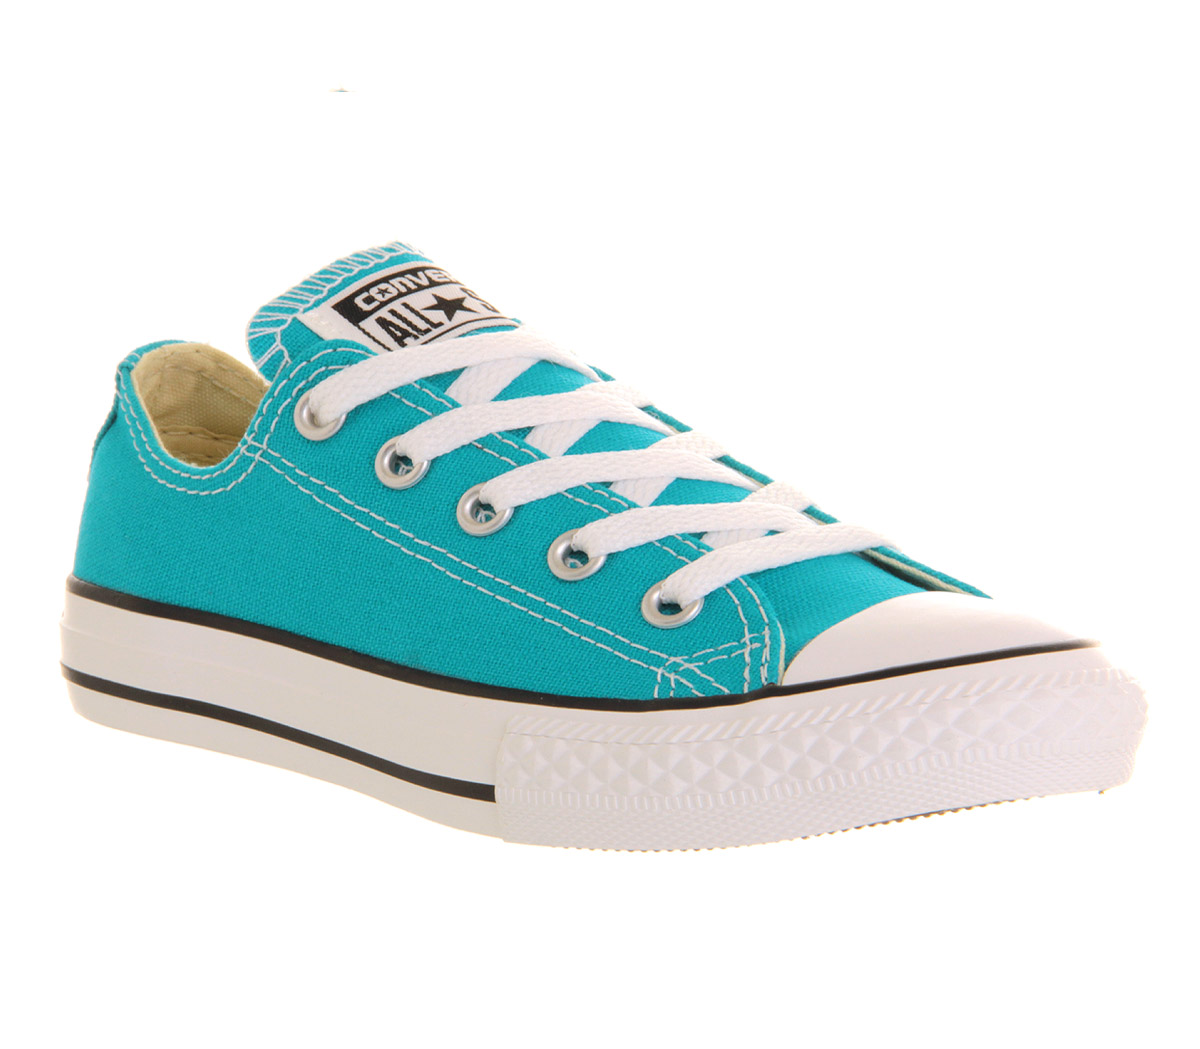 converse all star turquoise off 69% - www.kagroup.in